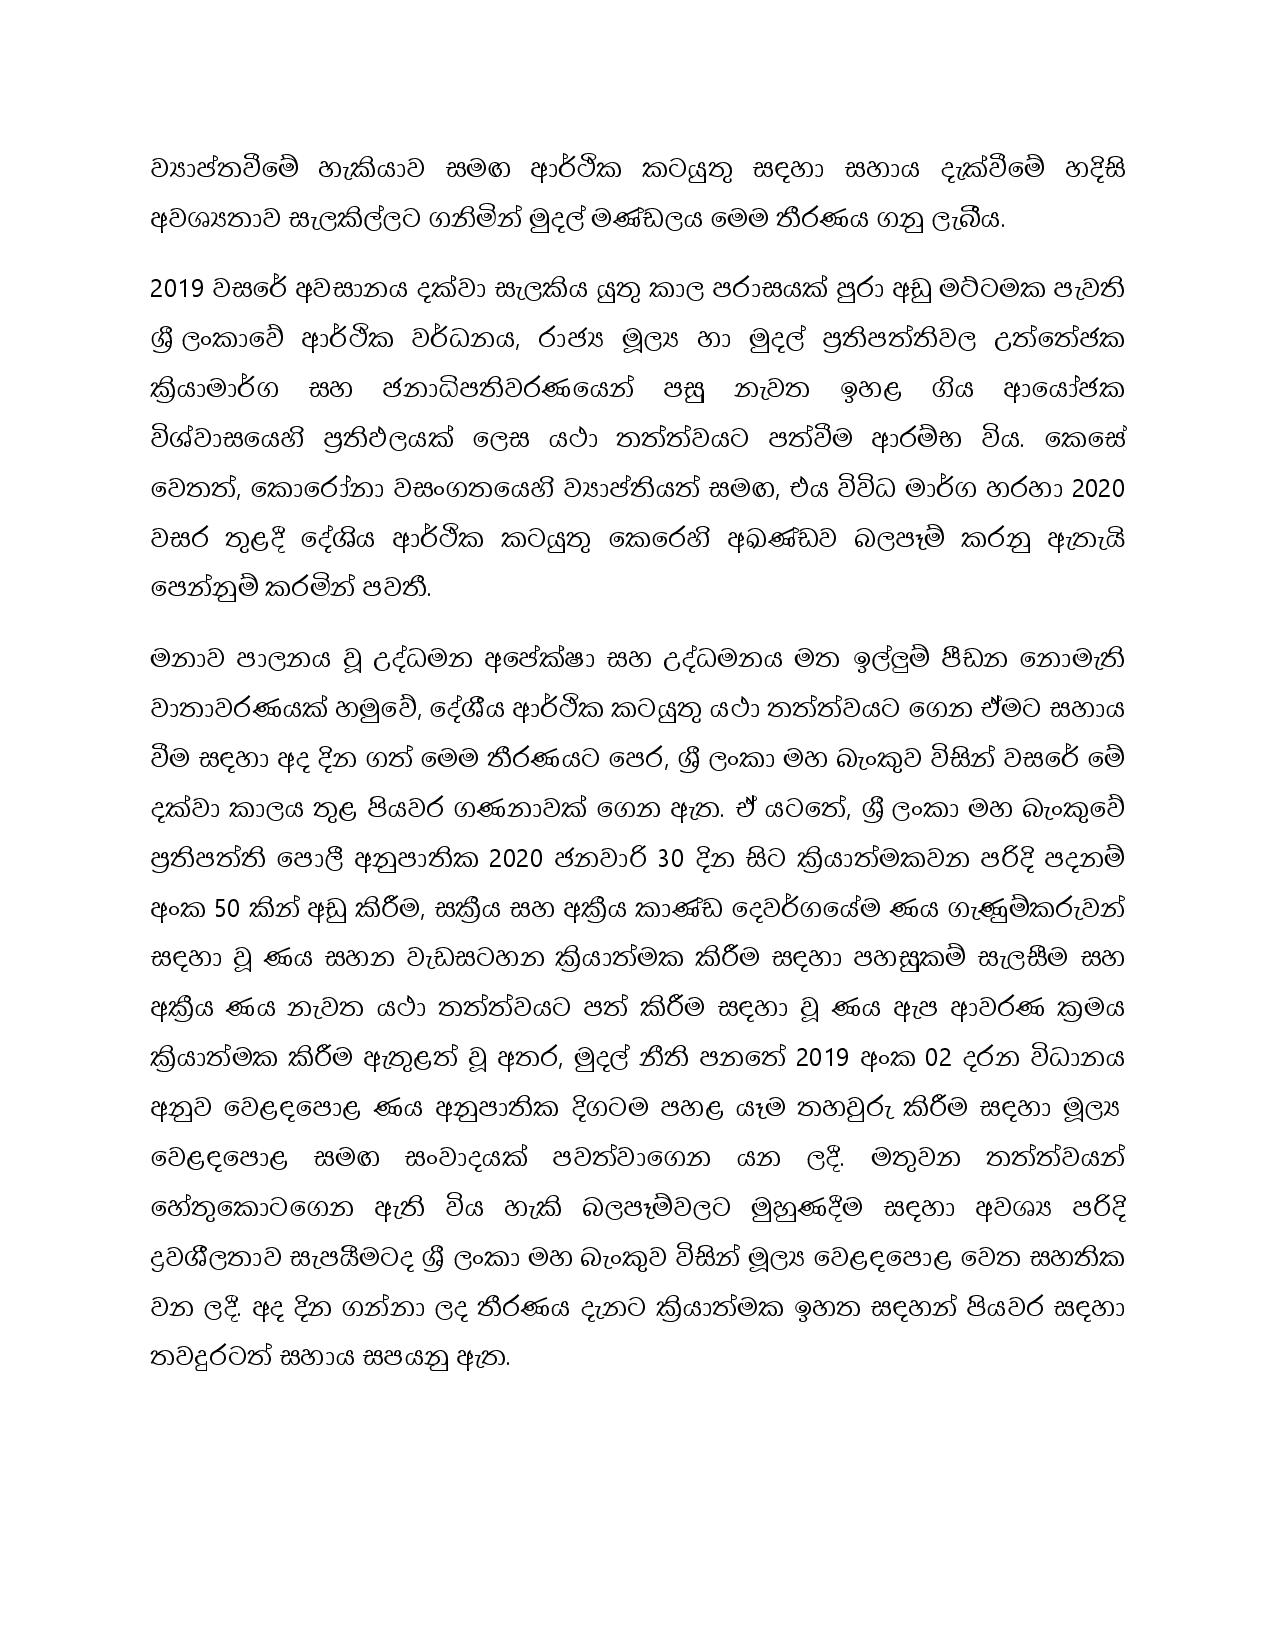 Press Release Special Monetary Policy 16.03.2020 page 002